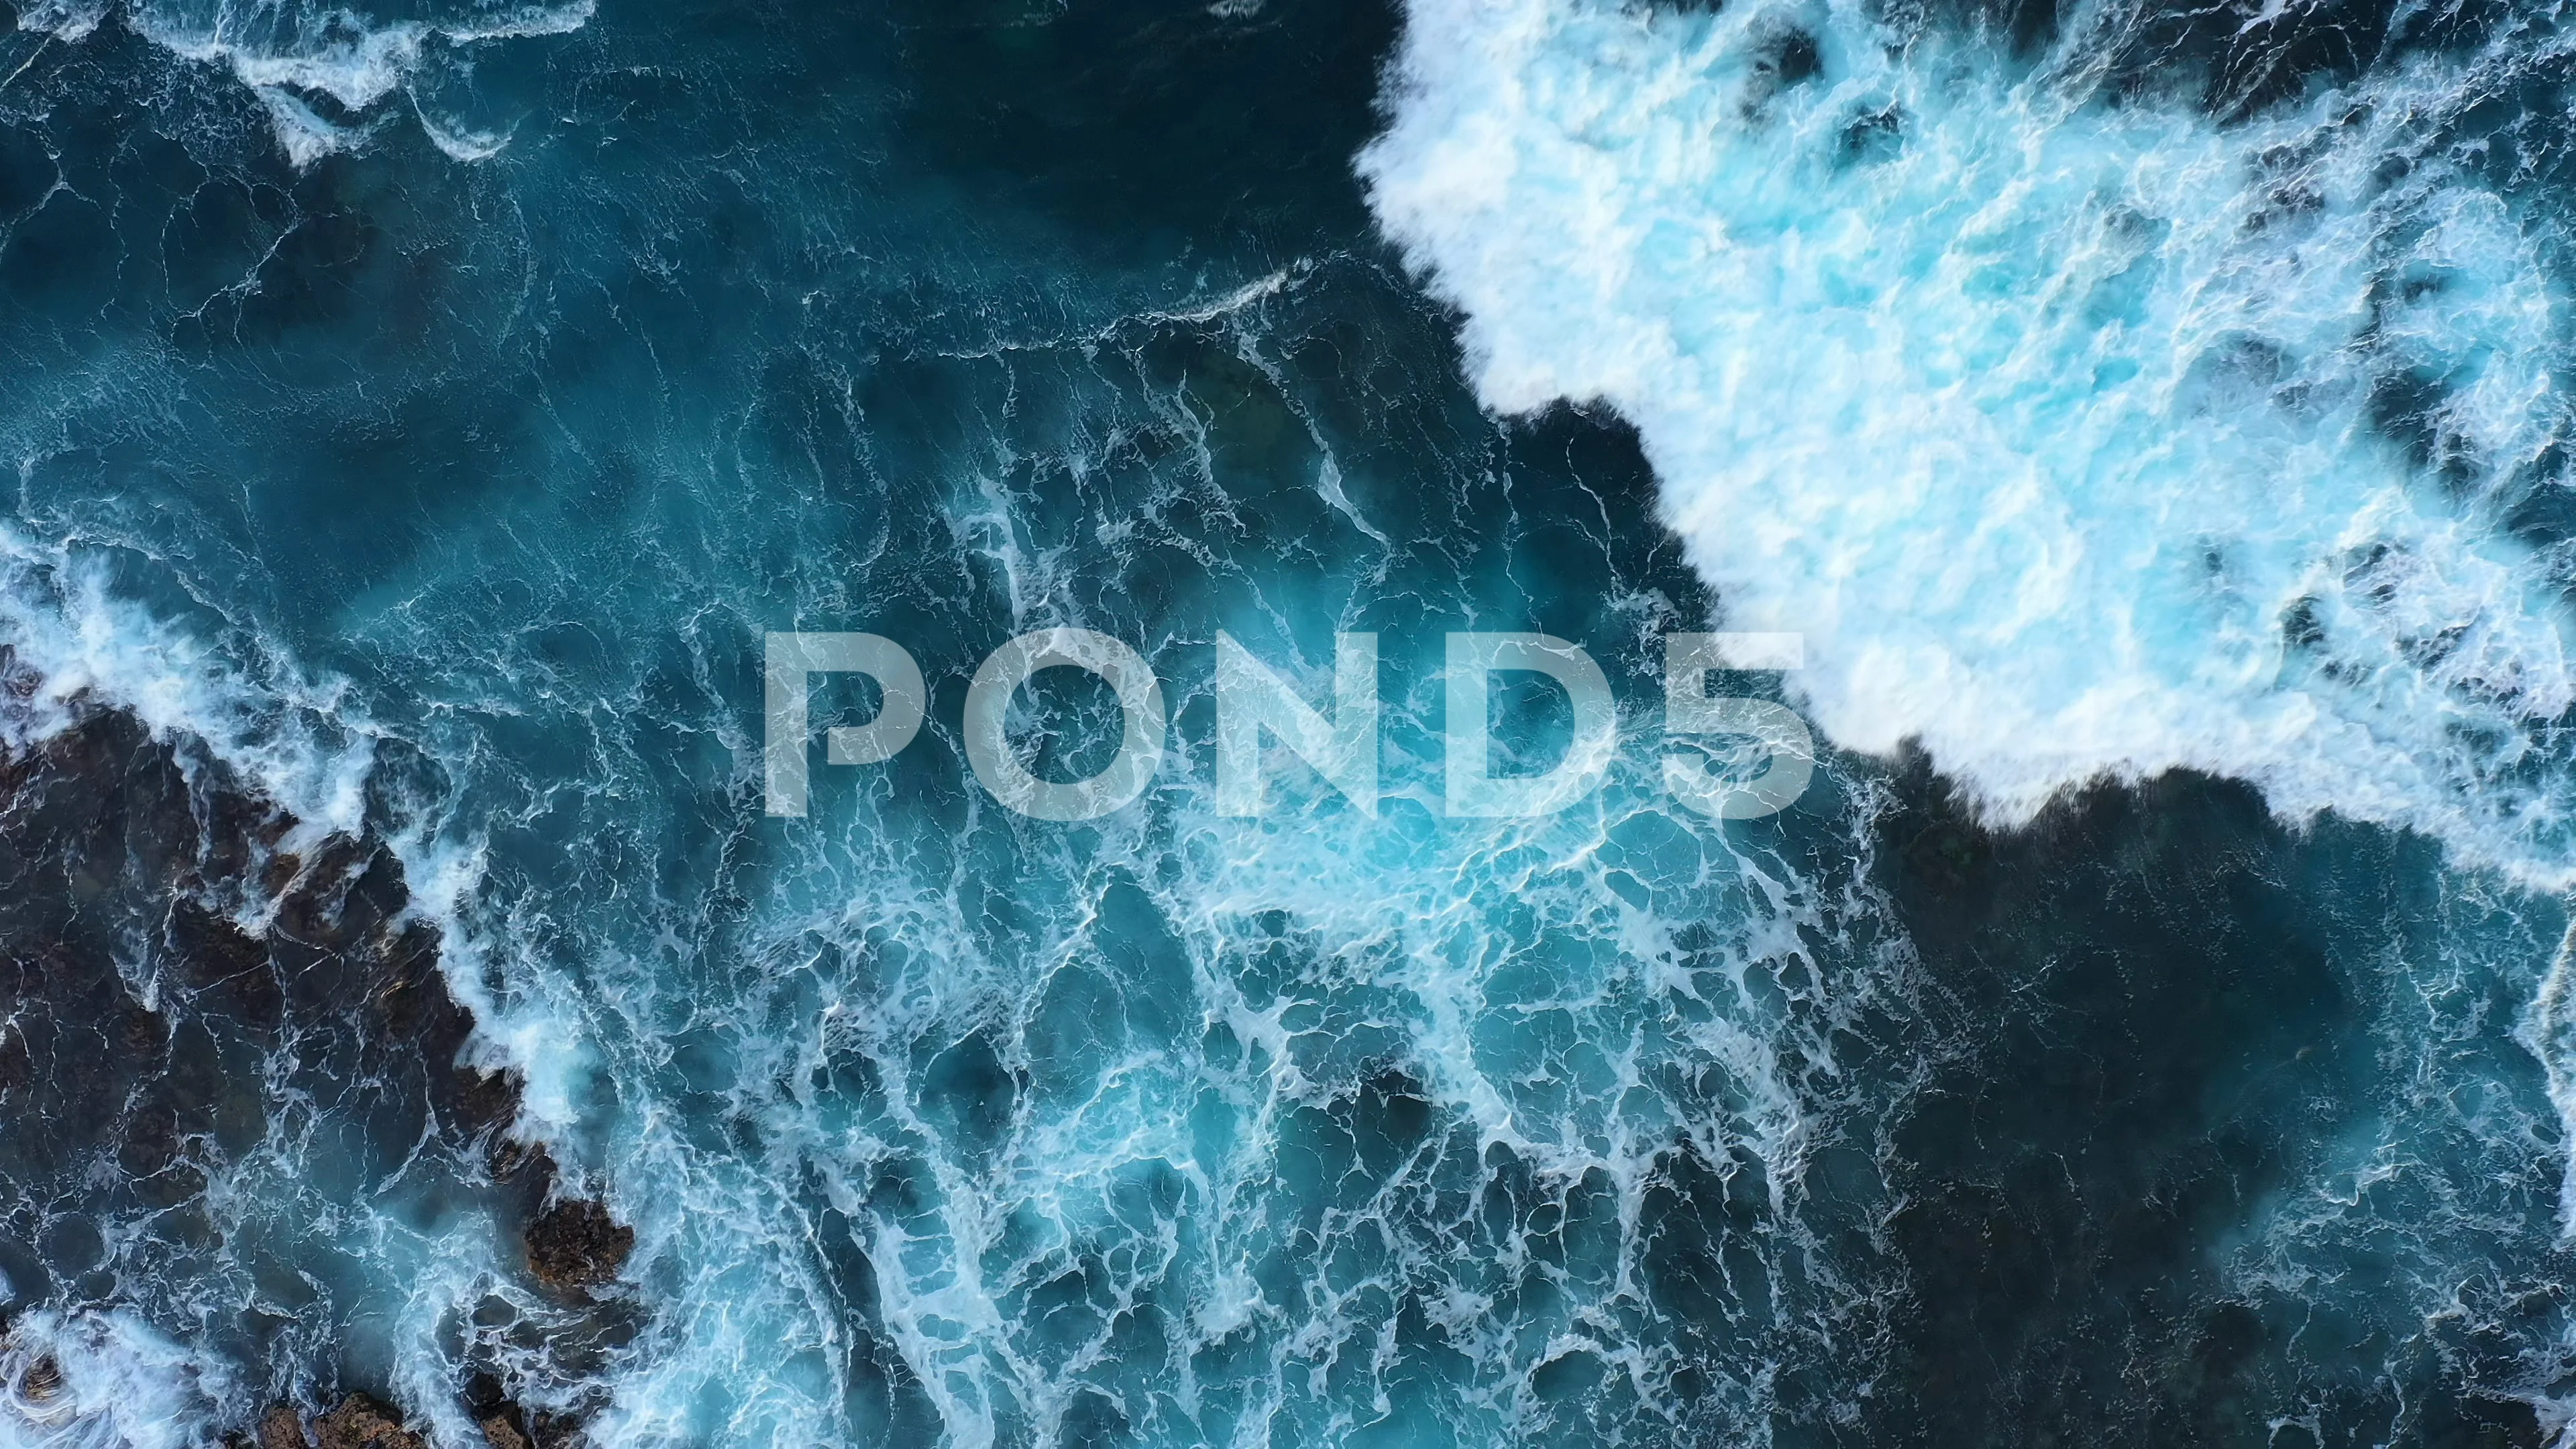 Top down abstract aerial view of ocean waves crashing on rocky coastline